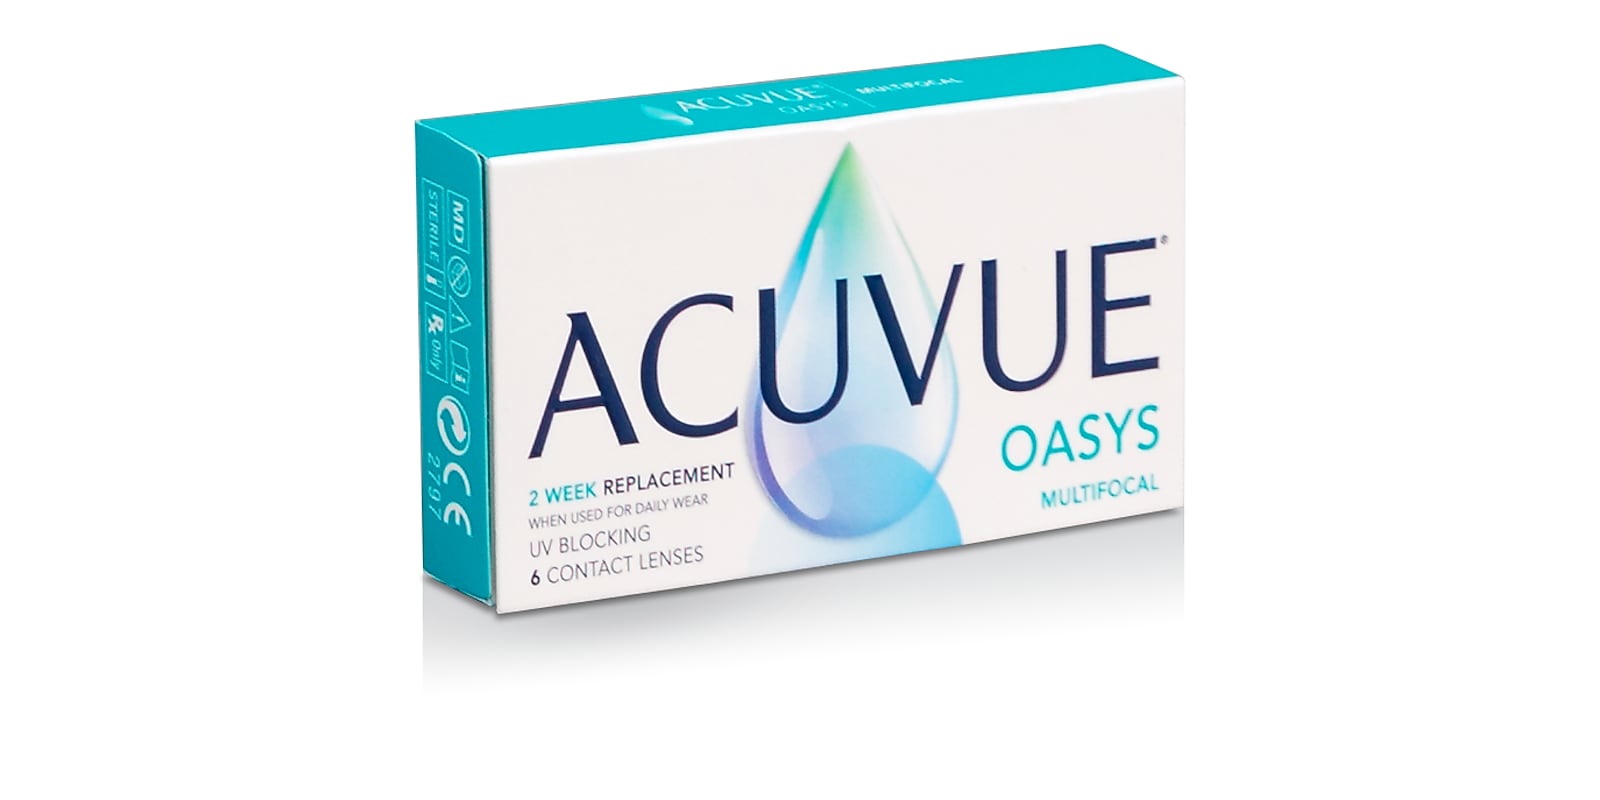 ACUVUE® OASYS Multifocal, 6 Pack contact lenses